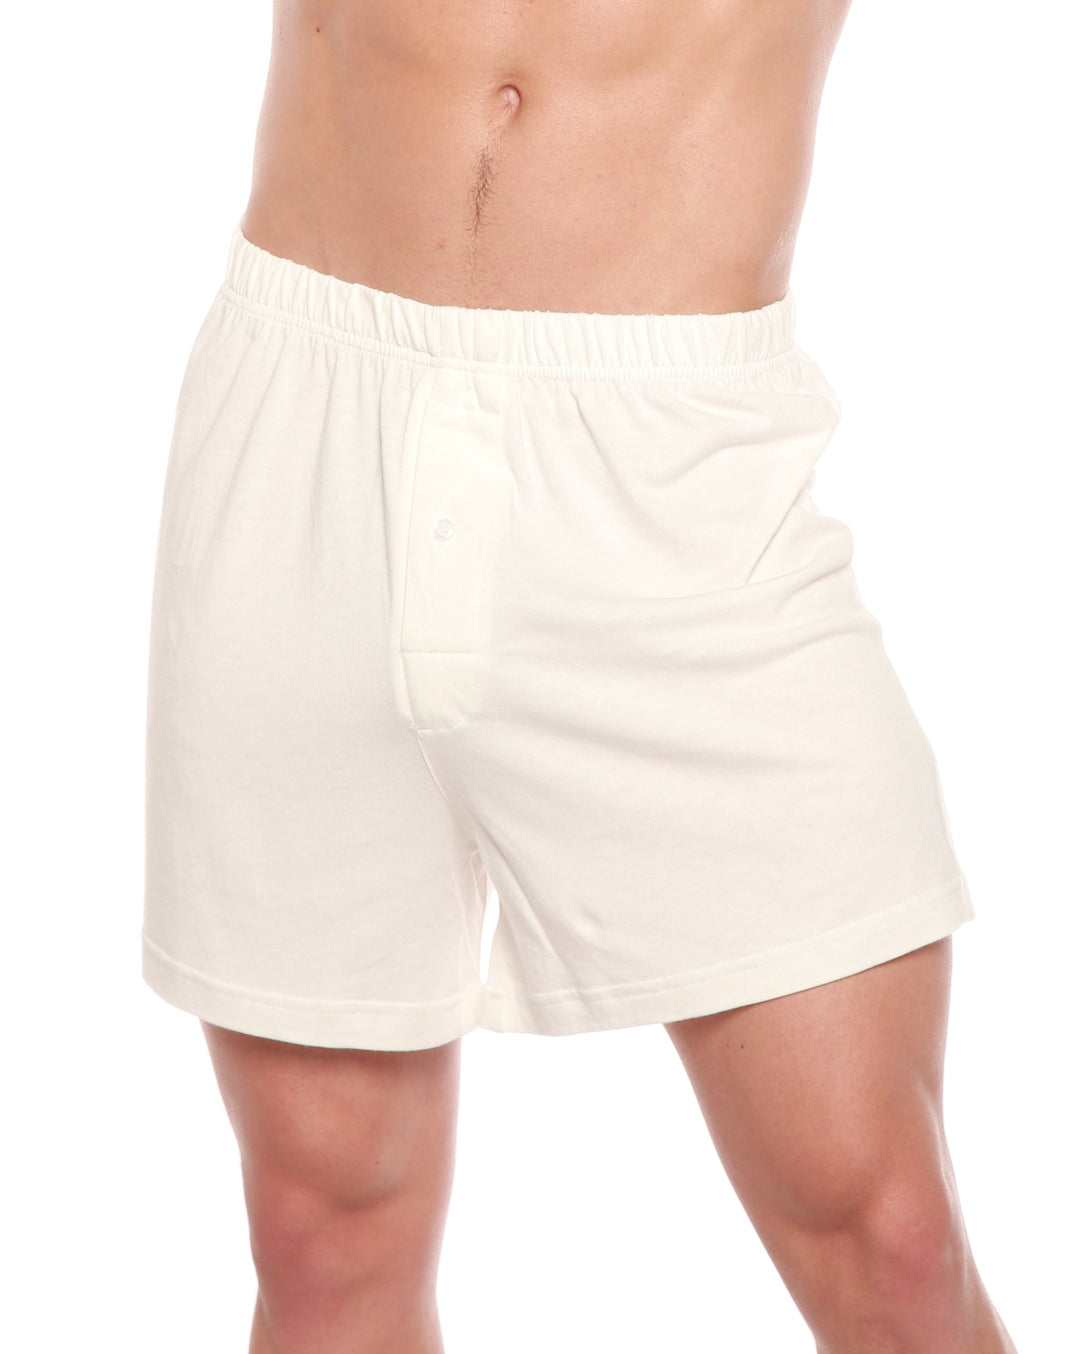 Men's Bamboo Viscose Organic Cotton Boxers Single Pack Bamboo Underwear  Silky Soft Breathable Boxer Shorts 